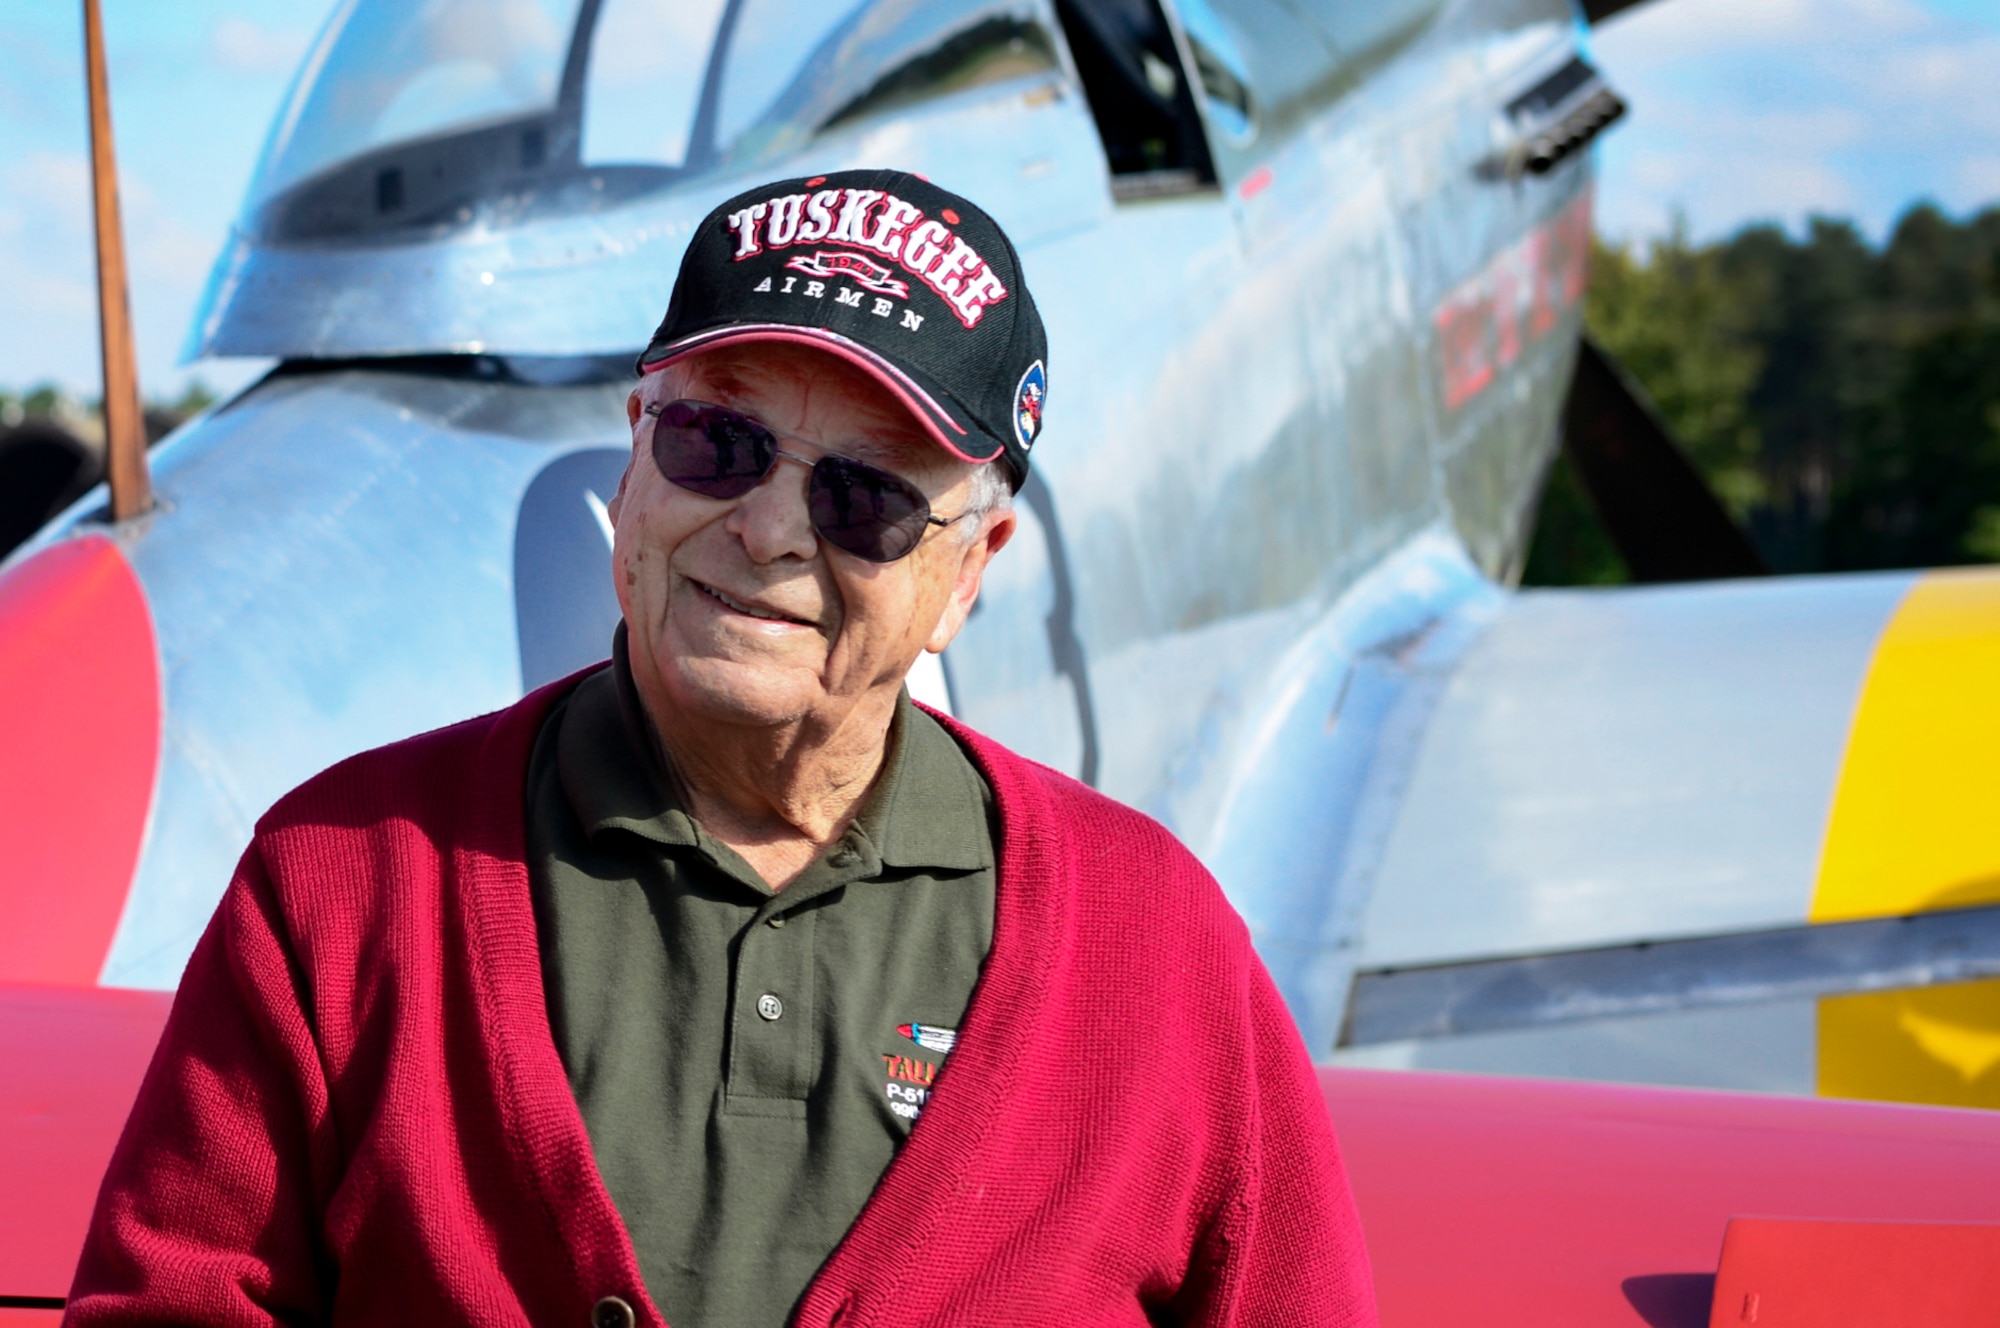 U.S. Air Force retired Lt. Col. George E. Hardy, a Tuskegee Airman, stands next to his former P-51D Mustang at Royal Air Force Lakenheath, England, Oct. 4, 2016. The Tuskegee Airmenwere an all African-American fighter group during World War II and consisted of more than 900 pilots who maintained and flew combat missions while overseas.  (U.S. Air Force photo/ Senior Airman Malcolm Mayfield)